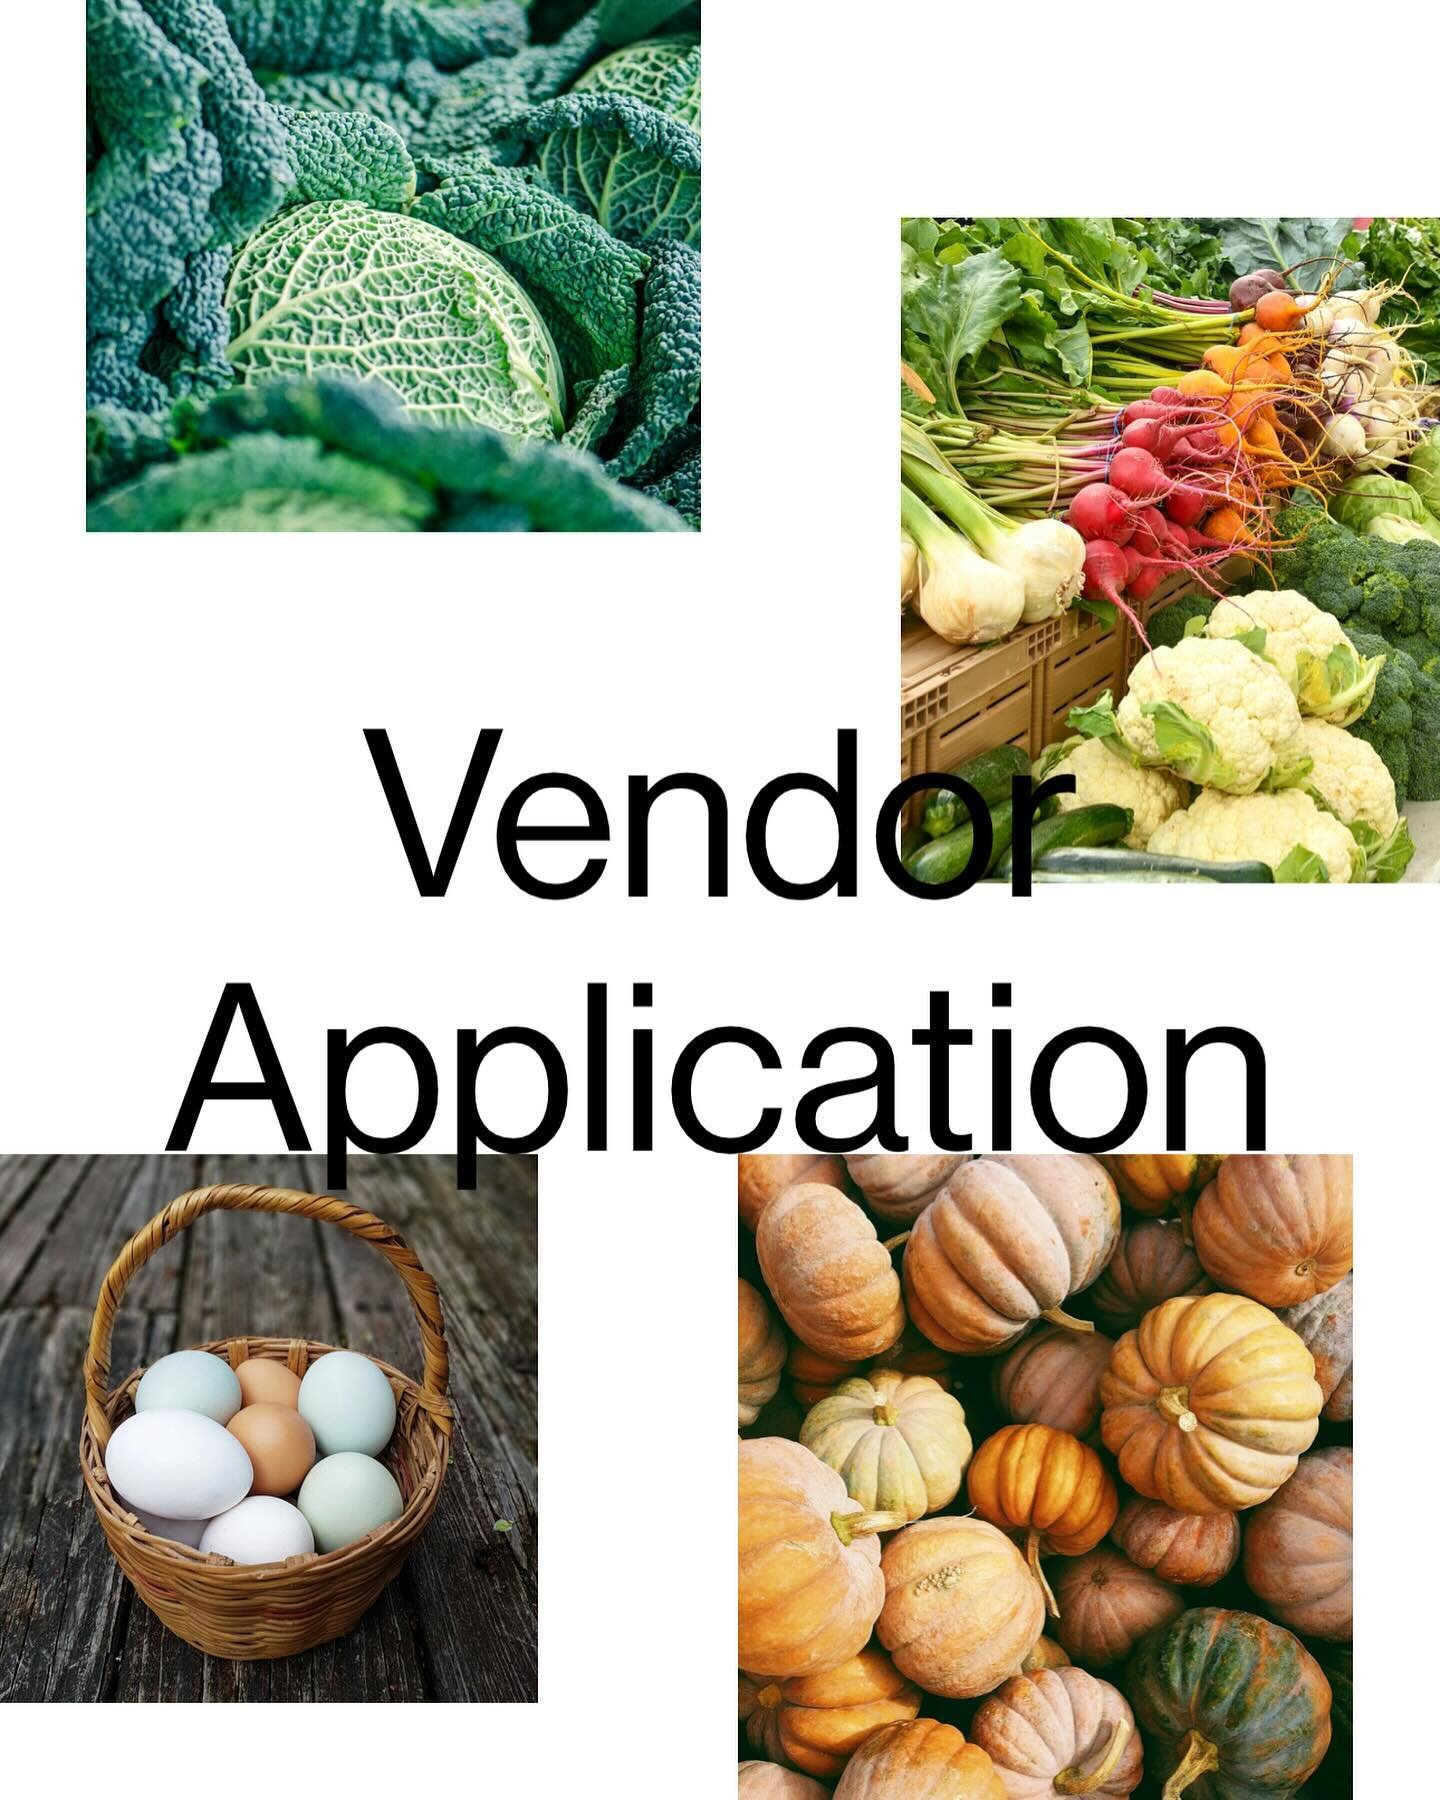 Applications are open for the coming market season! We&rsquo;ve had some come in already but would love to see more. This year you can also submit your application online! Visit our website for more info.
.
.
.
.
.
.
#beautifulbc #southcariboofarmers